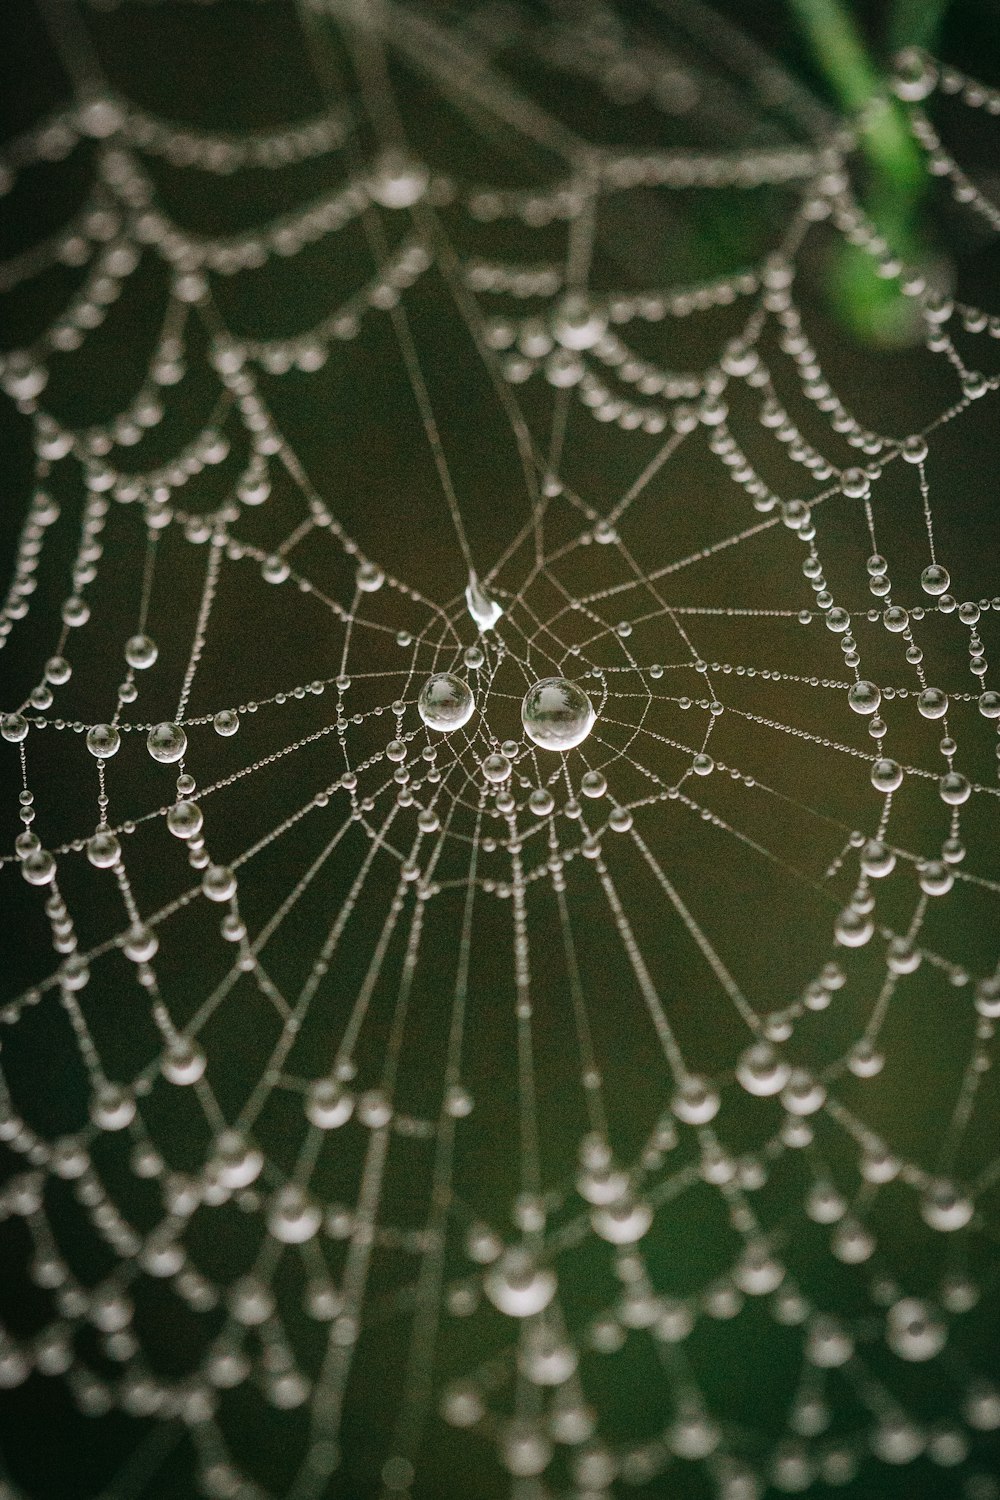 a spider web with dew drops